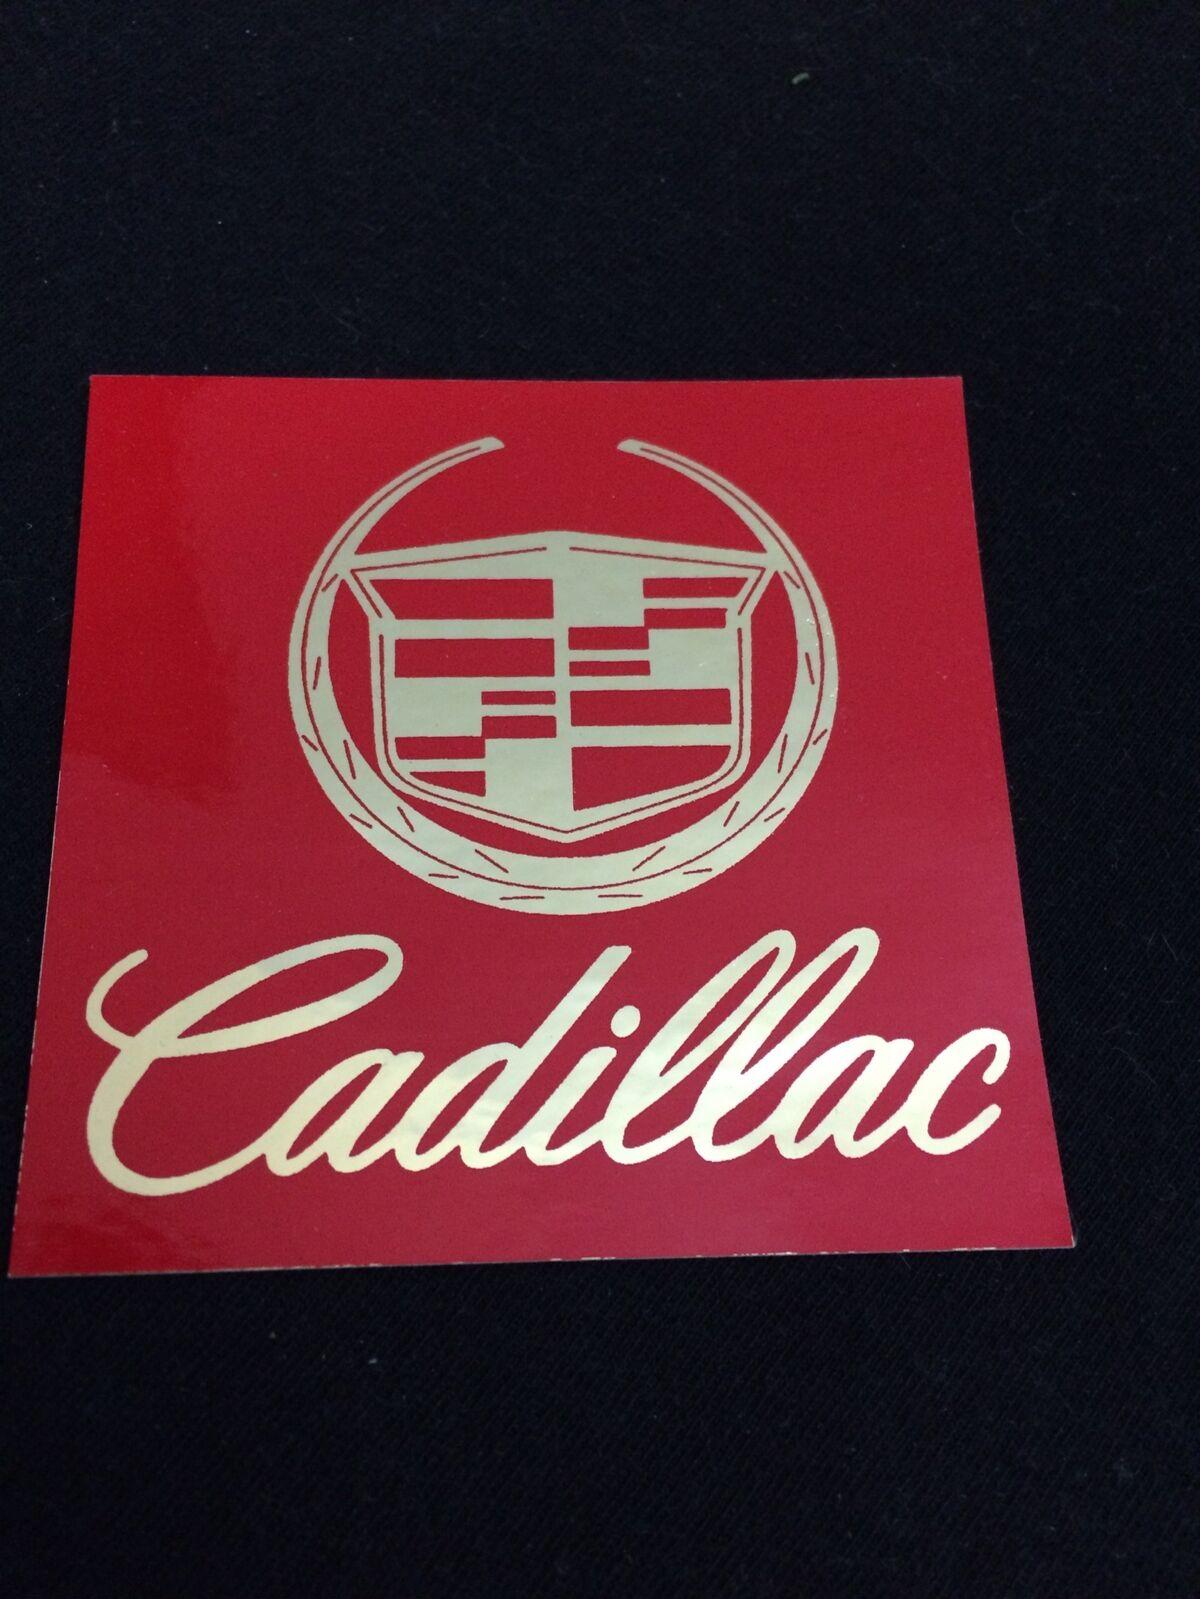 Red Gold Cadillac Car Logo Emblem Sticker Collection Edition